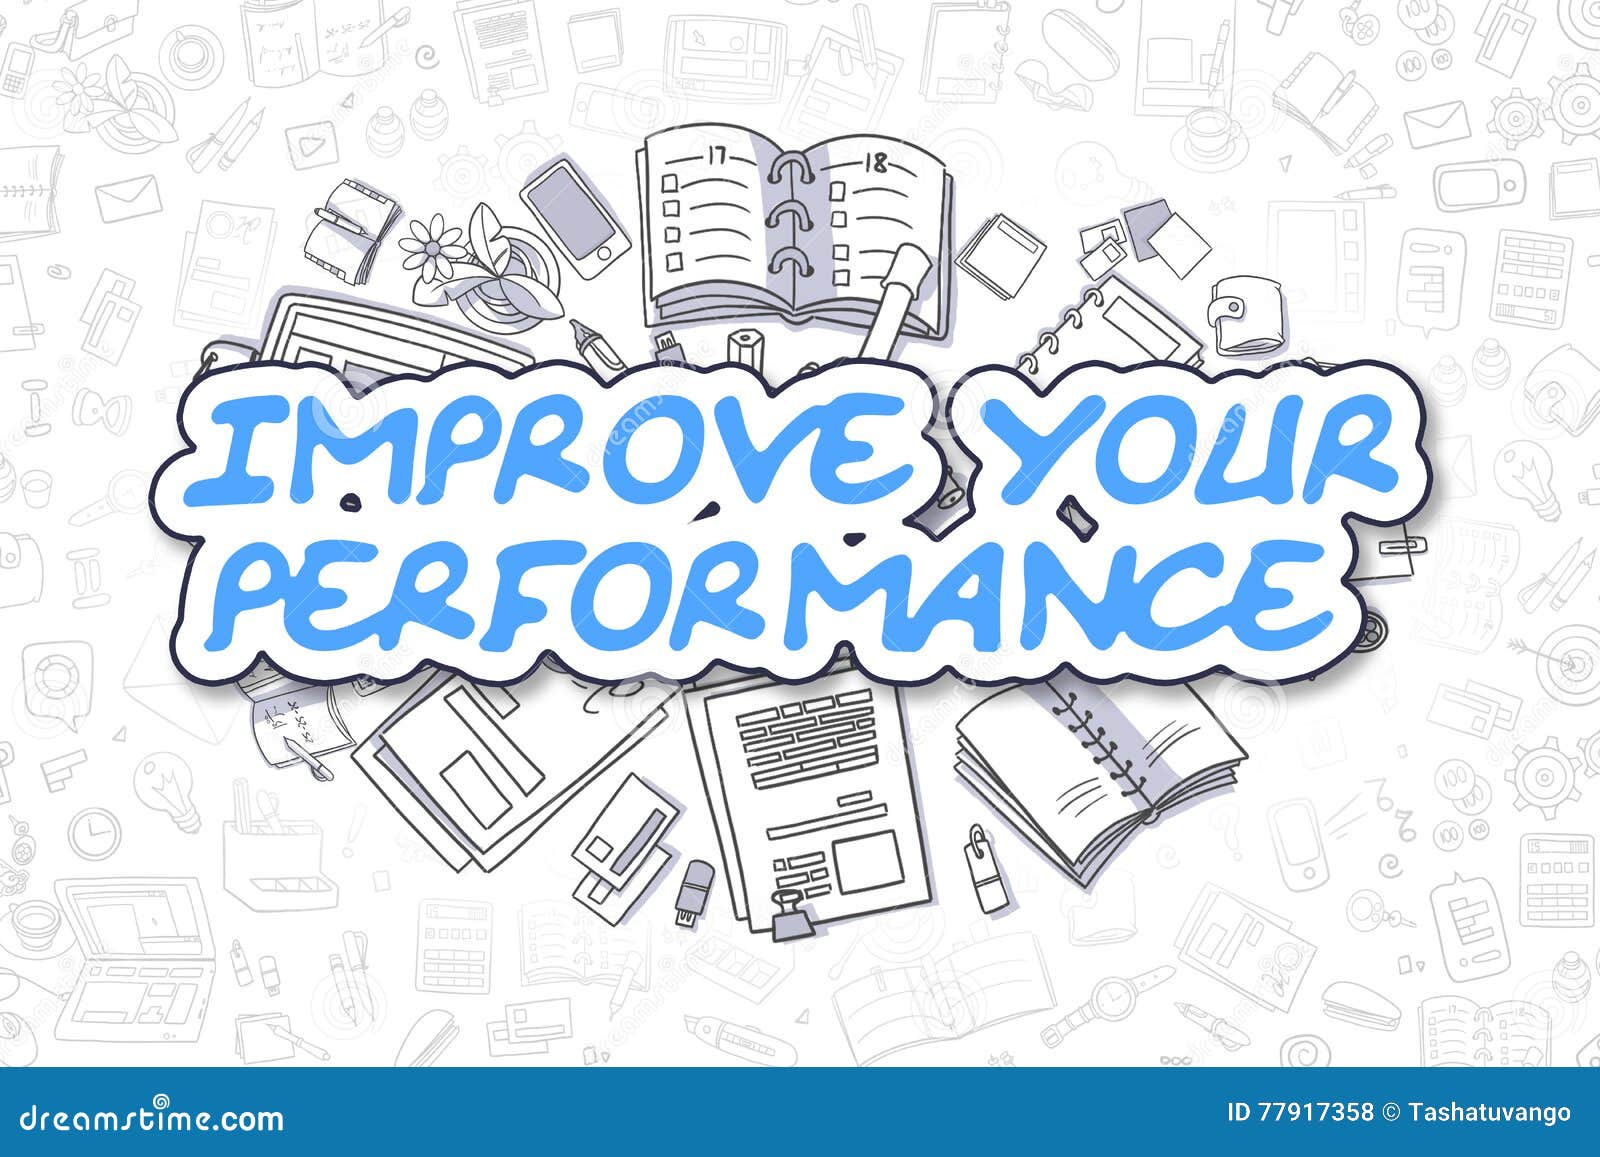 Improve Your Performance Business Concept Stock Illustration